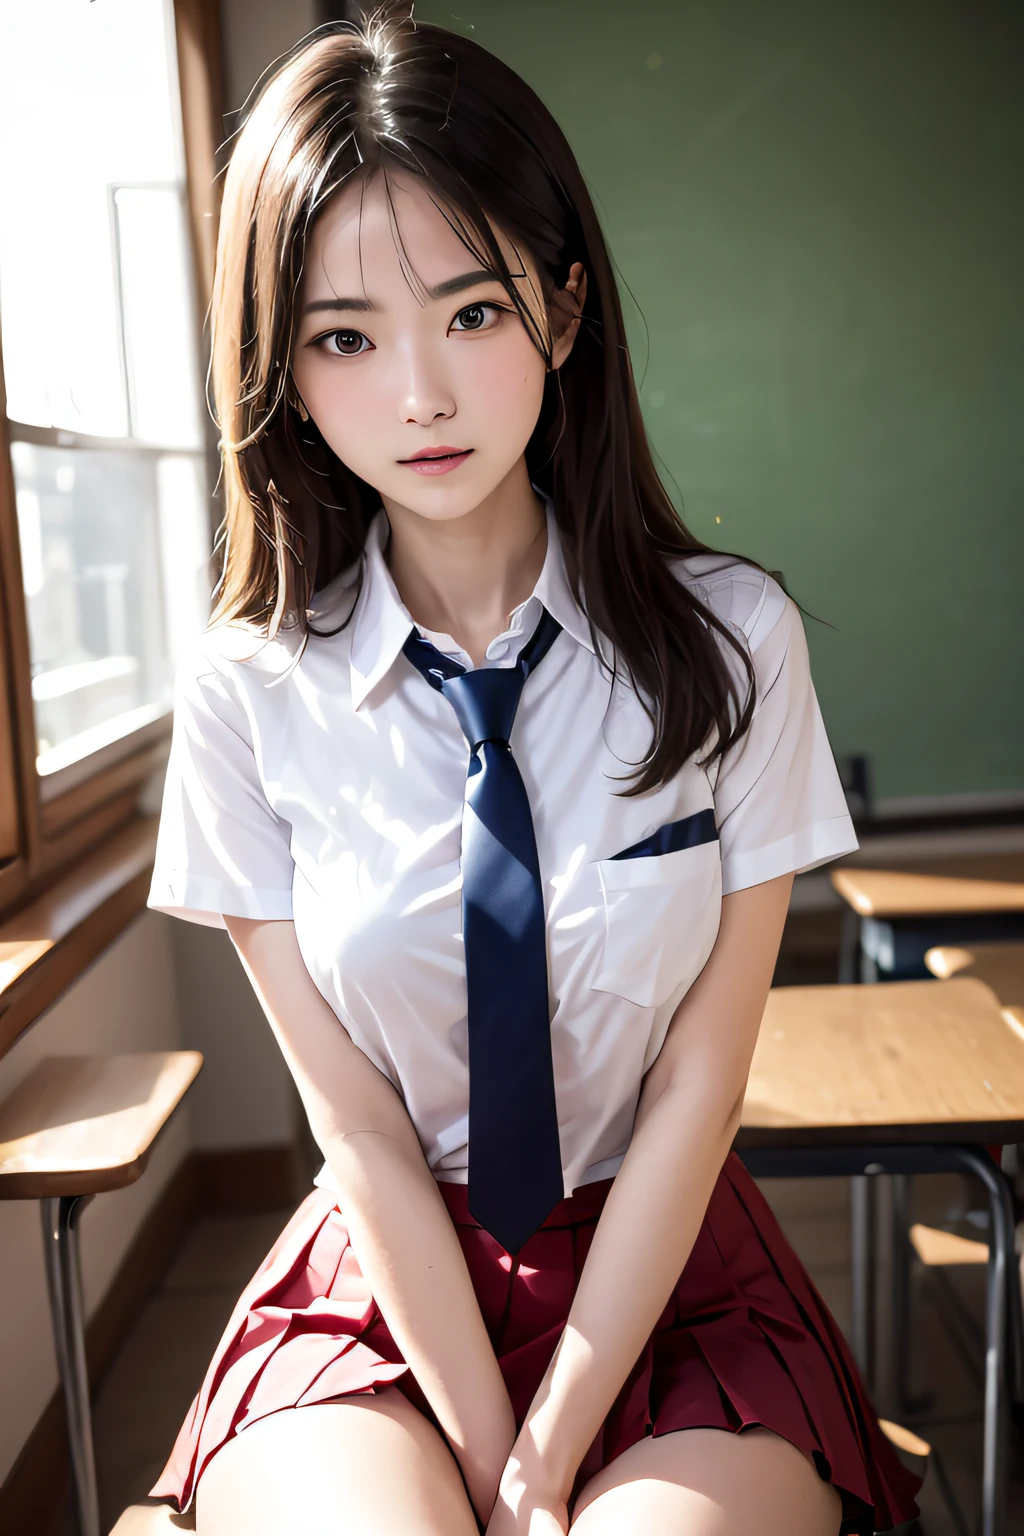 (masutepiece, Best Quality:1.2), 8K, sixteen years old, 85 mm, Official art, Raw photo, absurderes, White dress shirts, Pretty Face, low angle shot、close up, Upper body, violaceaess, gardeniass, Beautiful Girl, , (Navy pleated skirt:1.1), Cinch West, thighs thighs thighs thighs, Short sleeve, ‎Classroom, Gravure Pose, Looking at Viewer, No makeup,ssmile, Film grain, chromatic abberation, Sharp Focus, face lights, clear lighting, Teen, Detailed face, Bokeh background, (dark red necktie:1.1)、medium breasts⁩、Skinny face